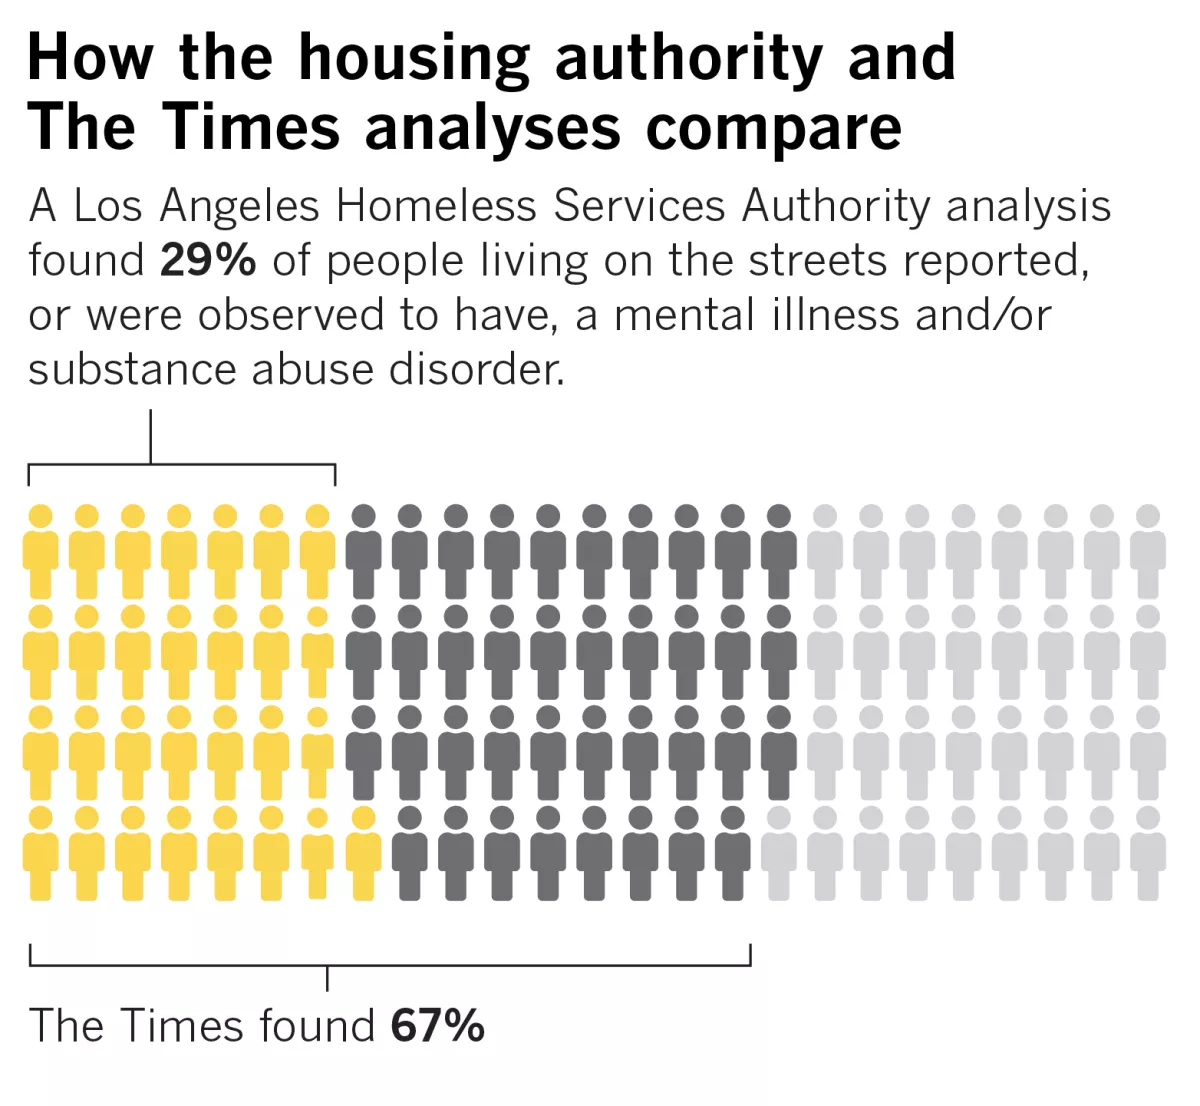 Mental illness, substance abuse and physical disabilities are much more pervasive in Los Angeles County’s homeless population than officials have previously reported, a Los Angeles Times analysis found in a 2019 story. The Times examined more than 4,000 questionnaires taken as part of that year’s point-in-time count and found that about 76 percent of individuals living outside on the streets reported being, or were observed to be, affected by mental illness, substance abuse, poor health or a physical disability. The Los Angeles Homeless Services Authority, which conducts the annual count, narrowly interpreted the data to produce much lower numbers. In its presentation of the results to elected officials earlier this year, the agency said only 29 percent of the homeless population had either a mental illness or substance abuse disorder and, therefore, 71 percent “did not have a serious mental illness and/or report substance use disorder.” The Times, however, found that about 67 percent had either a mental illness or a substance abuse disorder. Individually, substance abuse affects 46 percent of those living on the streets — more than three times the rate previously reported — and mental illness, including post-traumatic stress disorder, affects 51 percent of those living on the streets, according to the analysis. Data: Los Angeles Homeless Services Authority. Graphic: Los Angeles Times